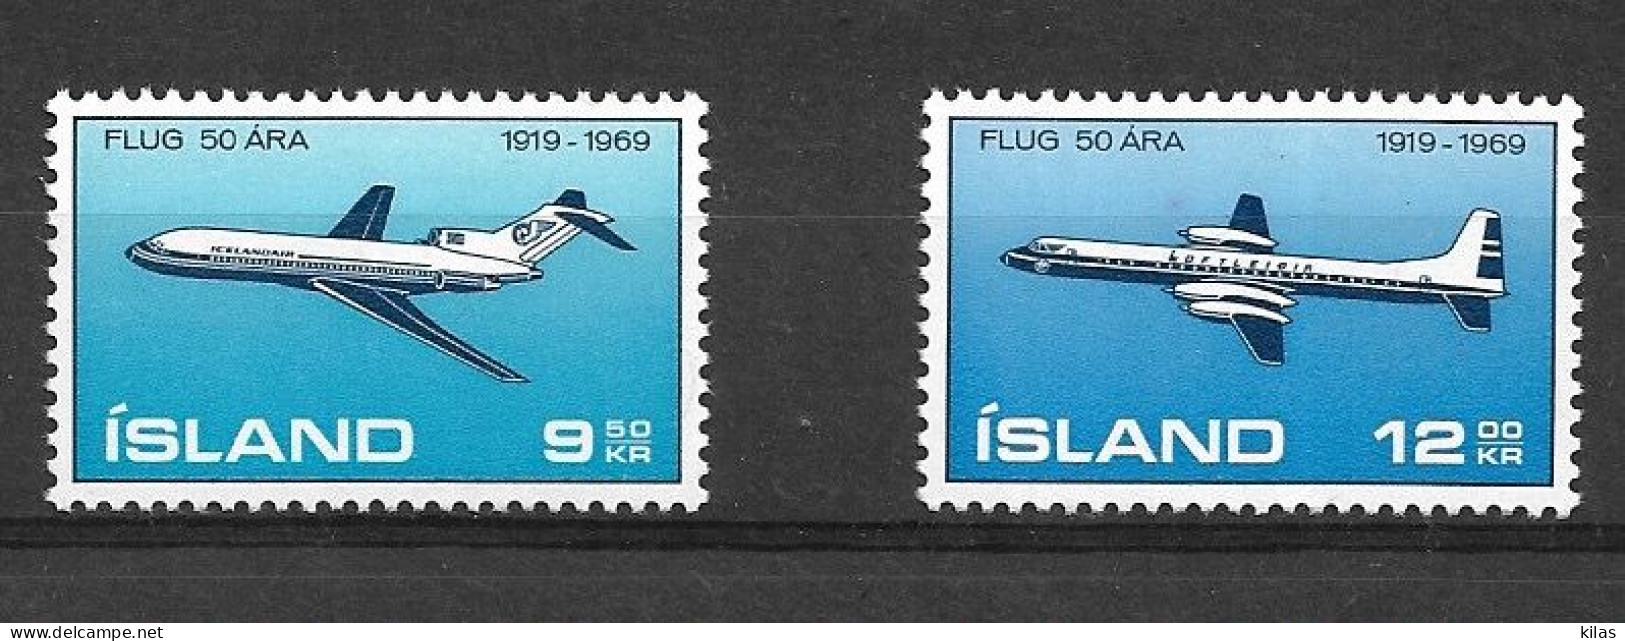 ICELAND 1969 Airmal 50TH ANNIVERSARY OF ICELANDIAN AVIATION  MNH - Airmail